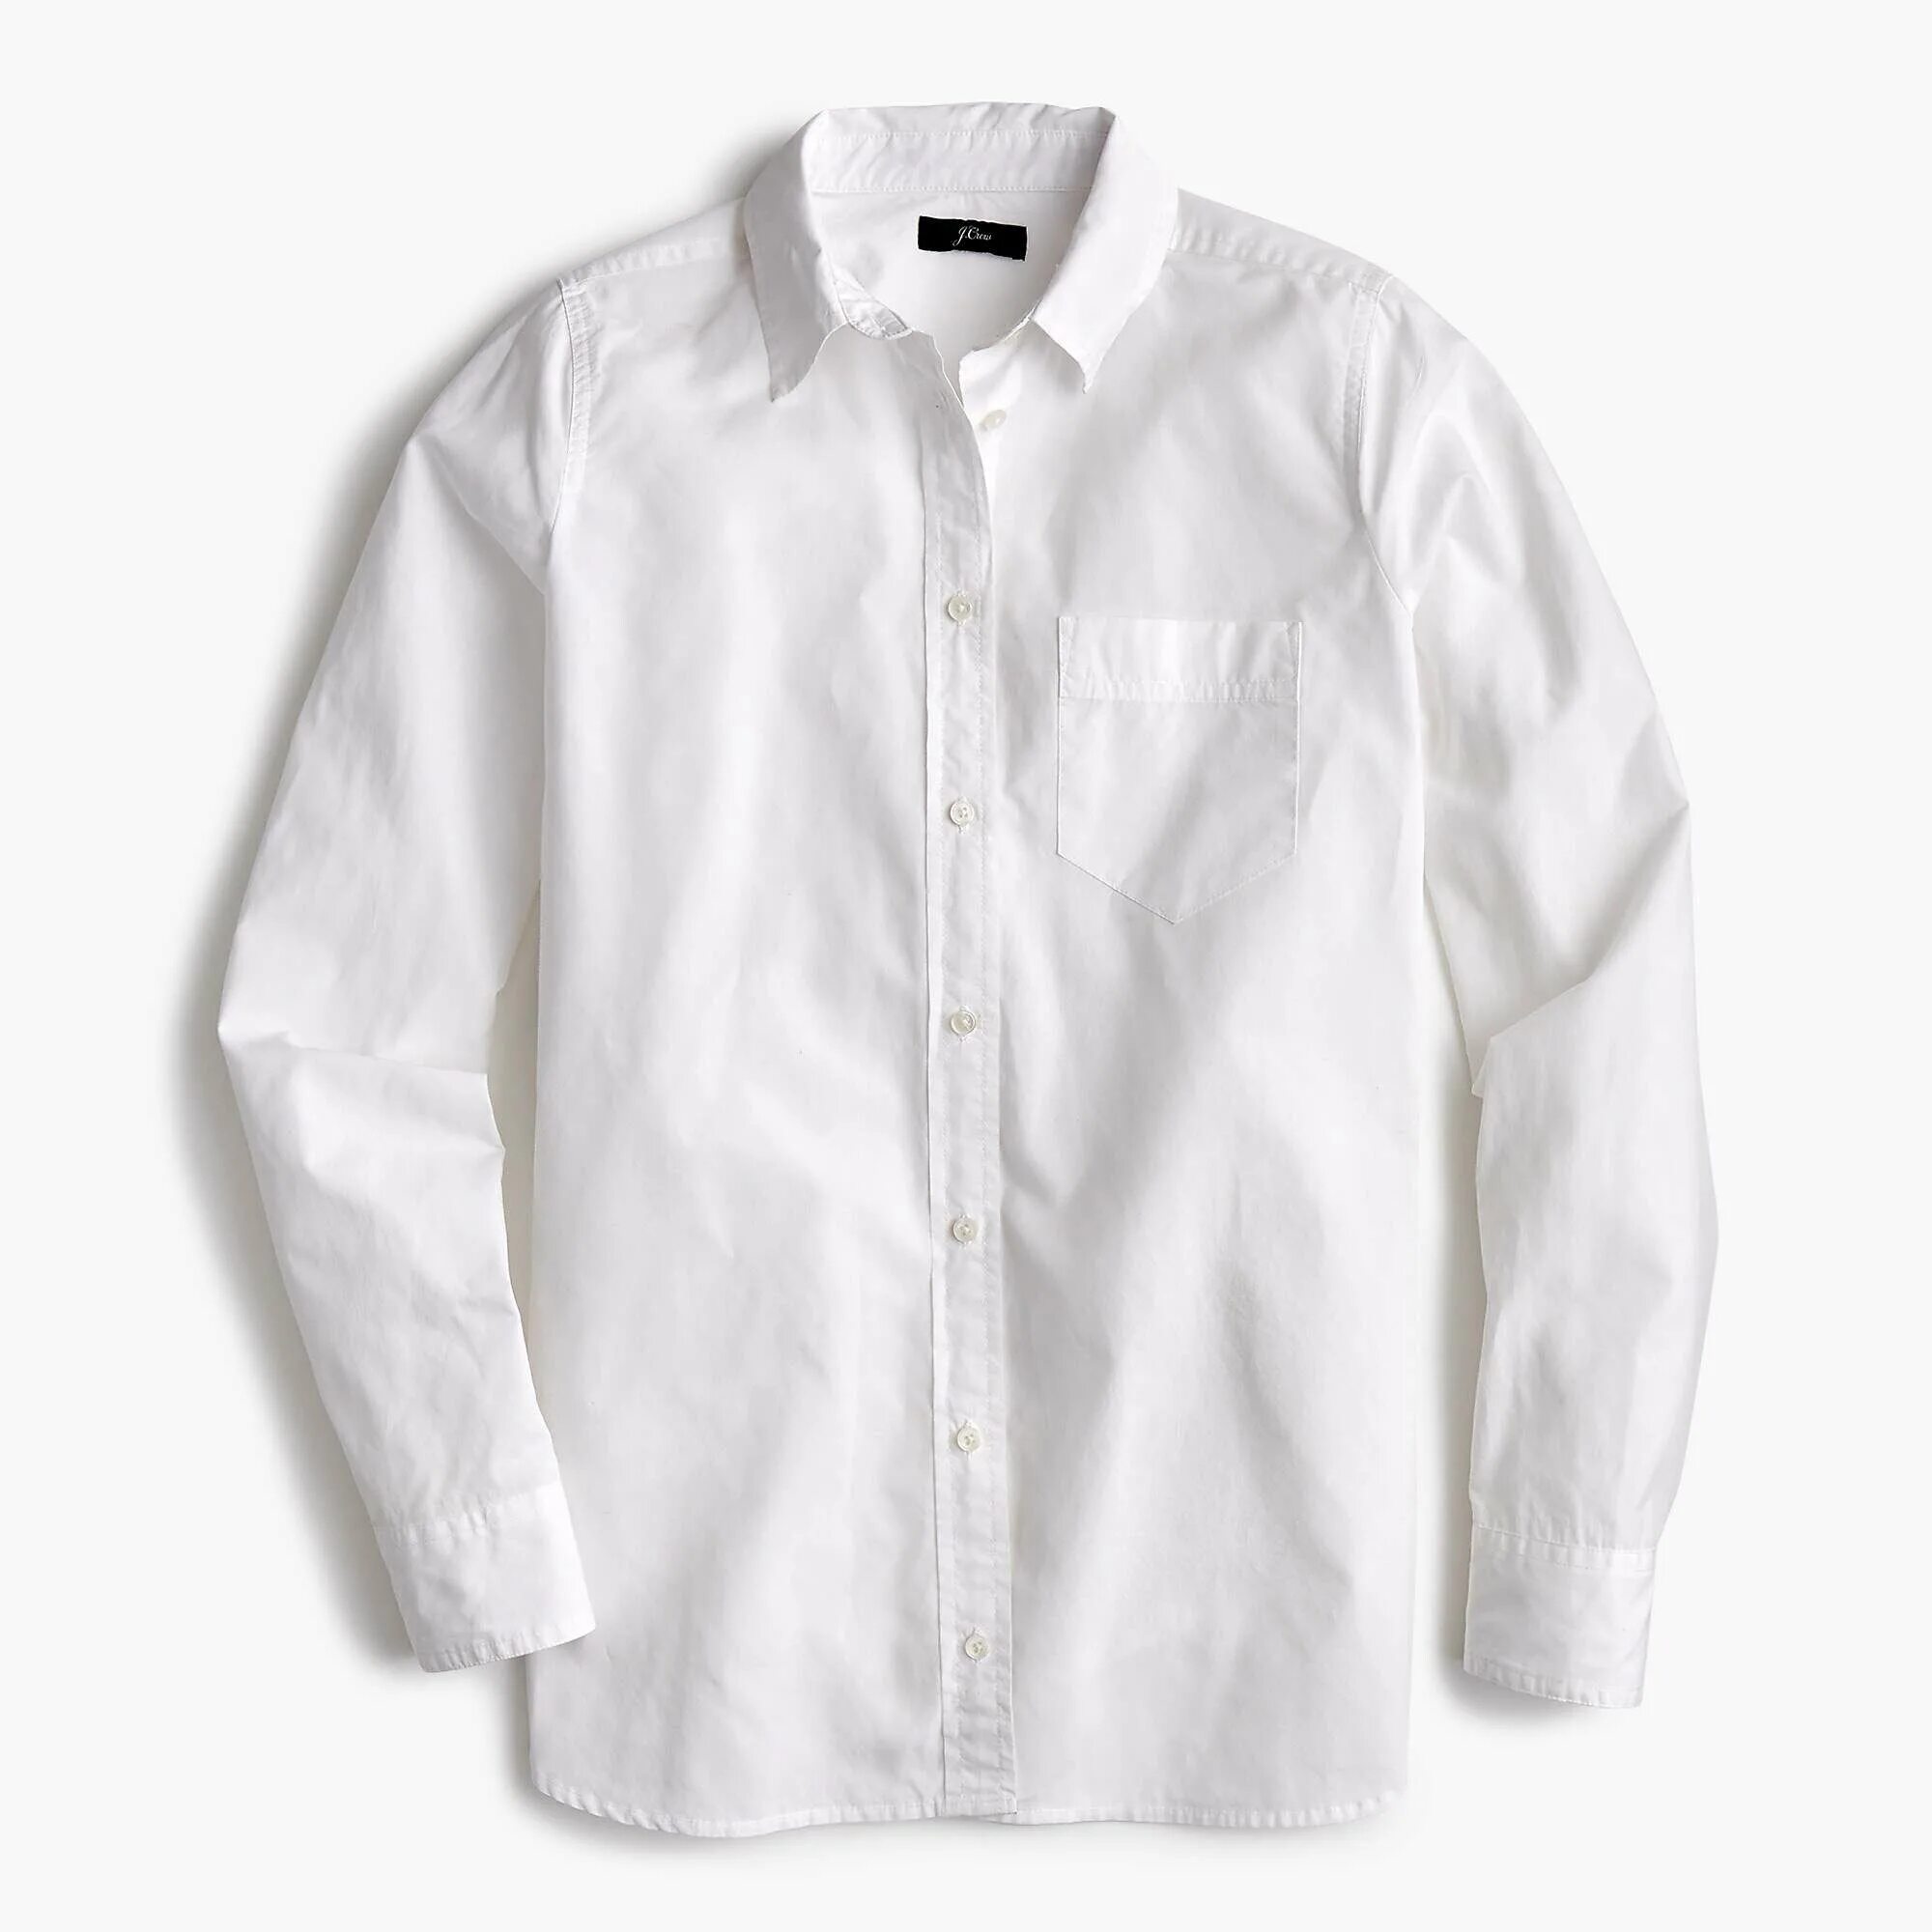 Рубашка Wiki. White button up Shirt. White Shirt with Jacket. Crystal Cuff button down in Cotton Poplin.